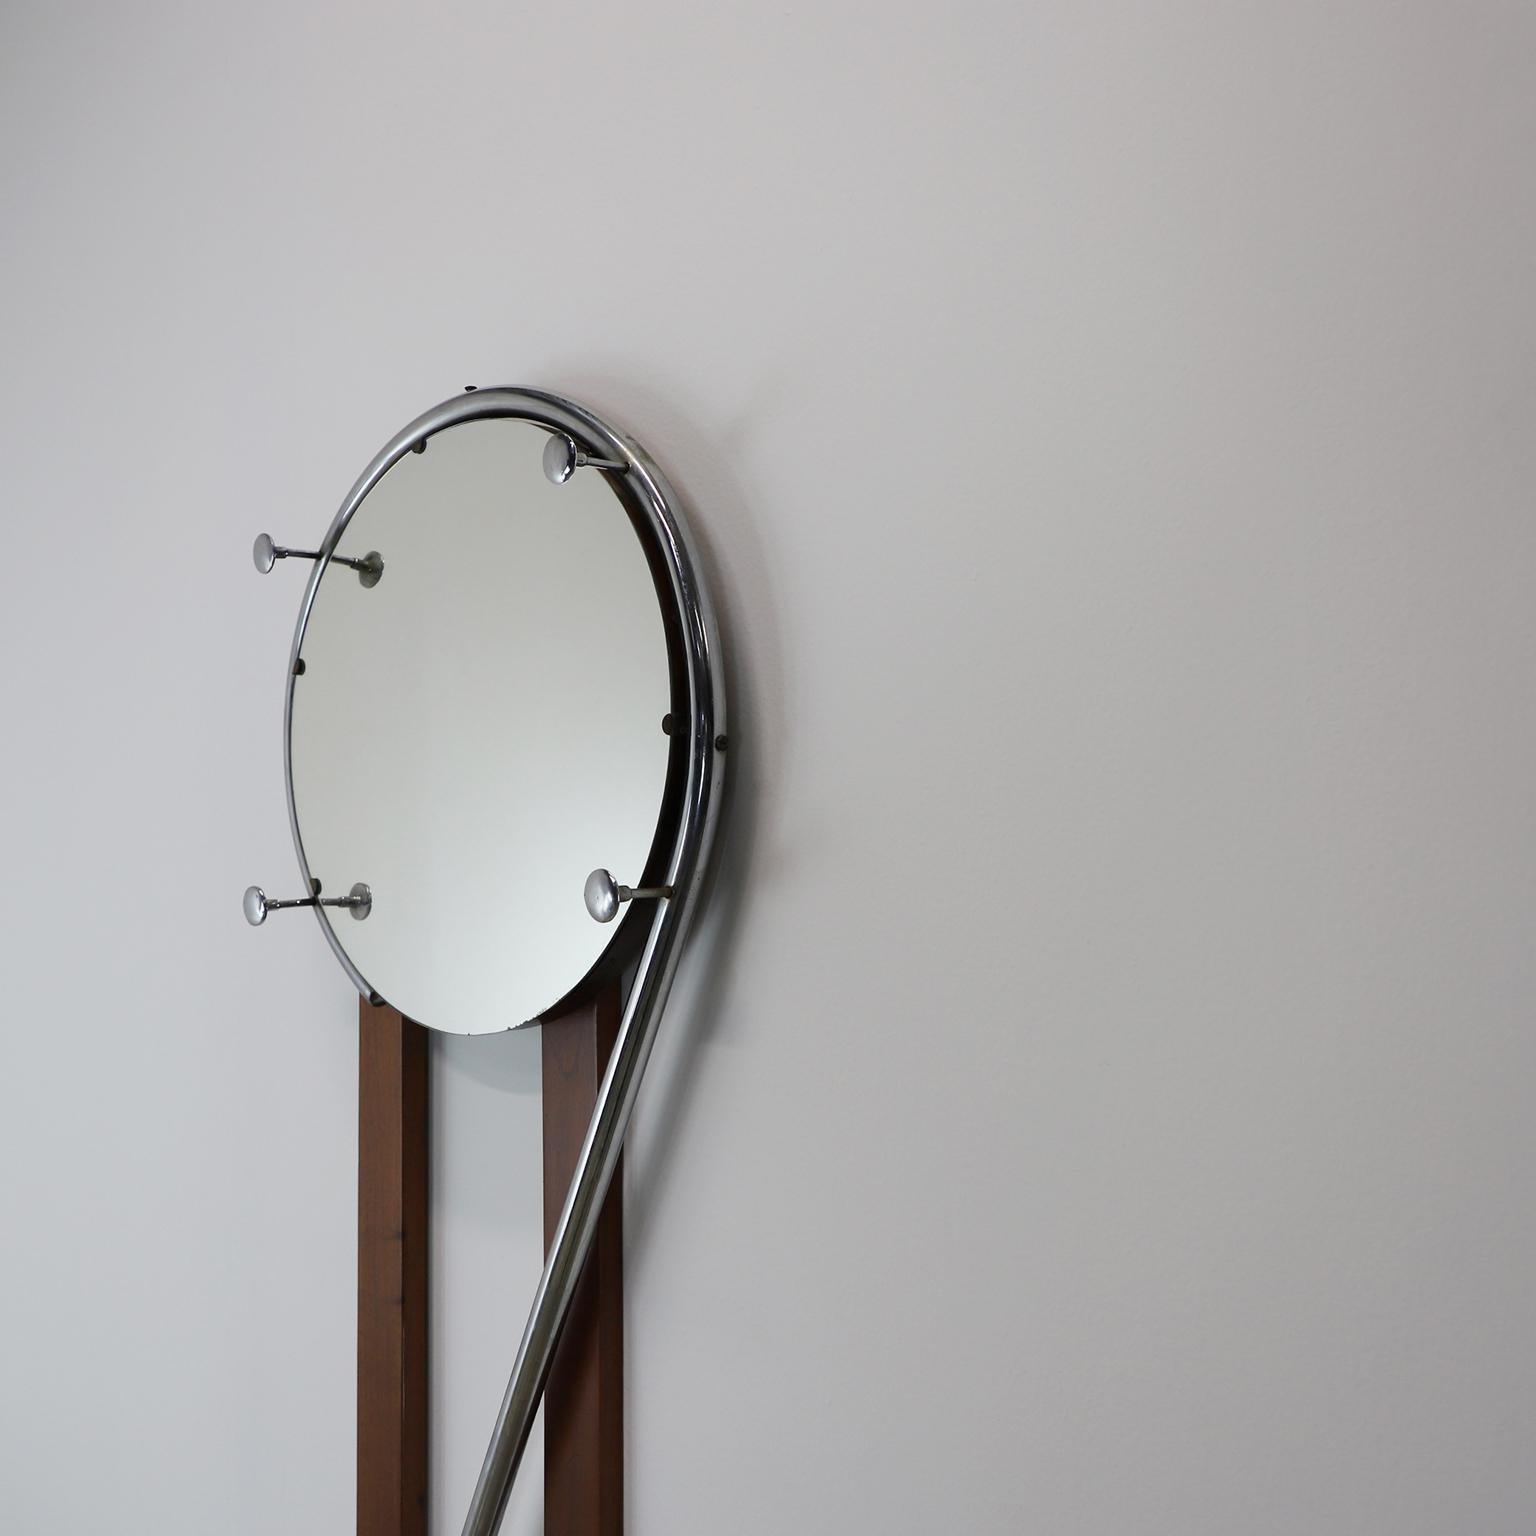 Mexican Chromed Mirror Bauhaus Style. For Sale